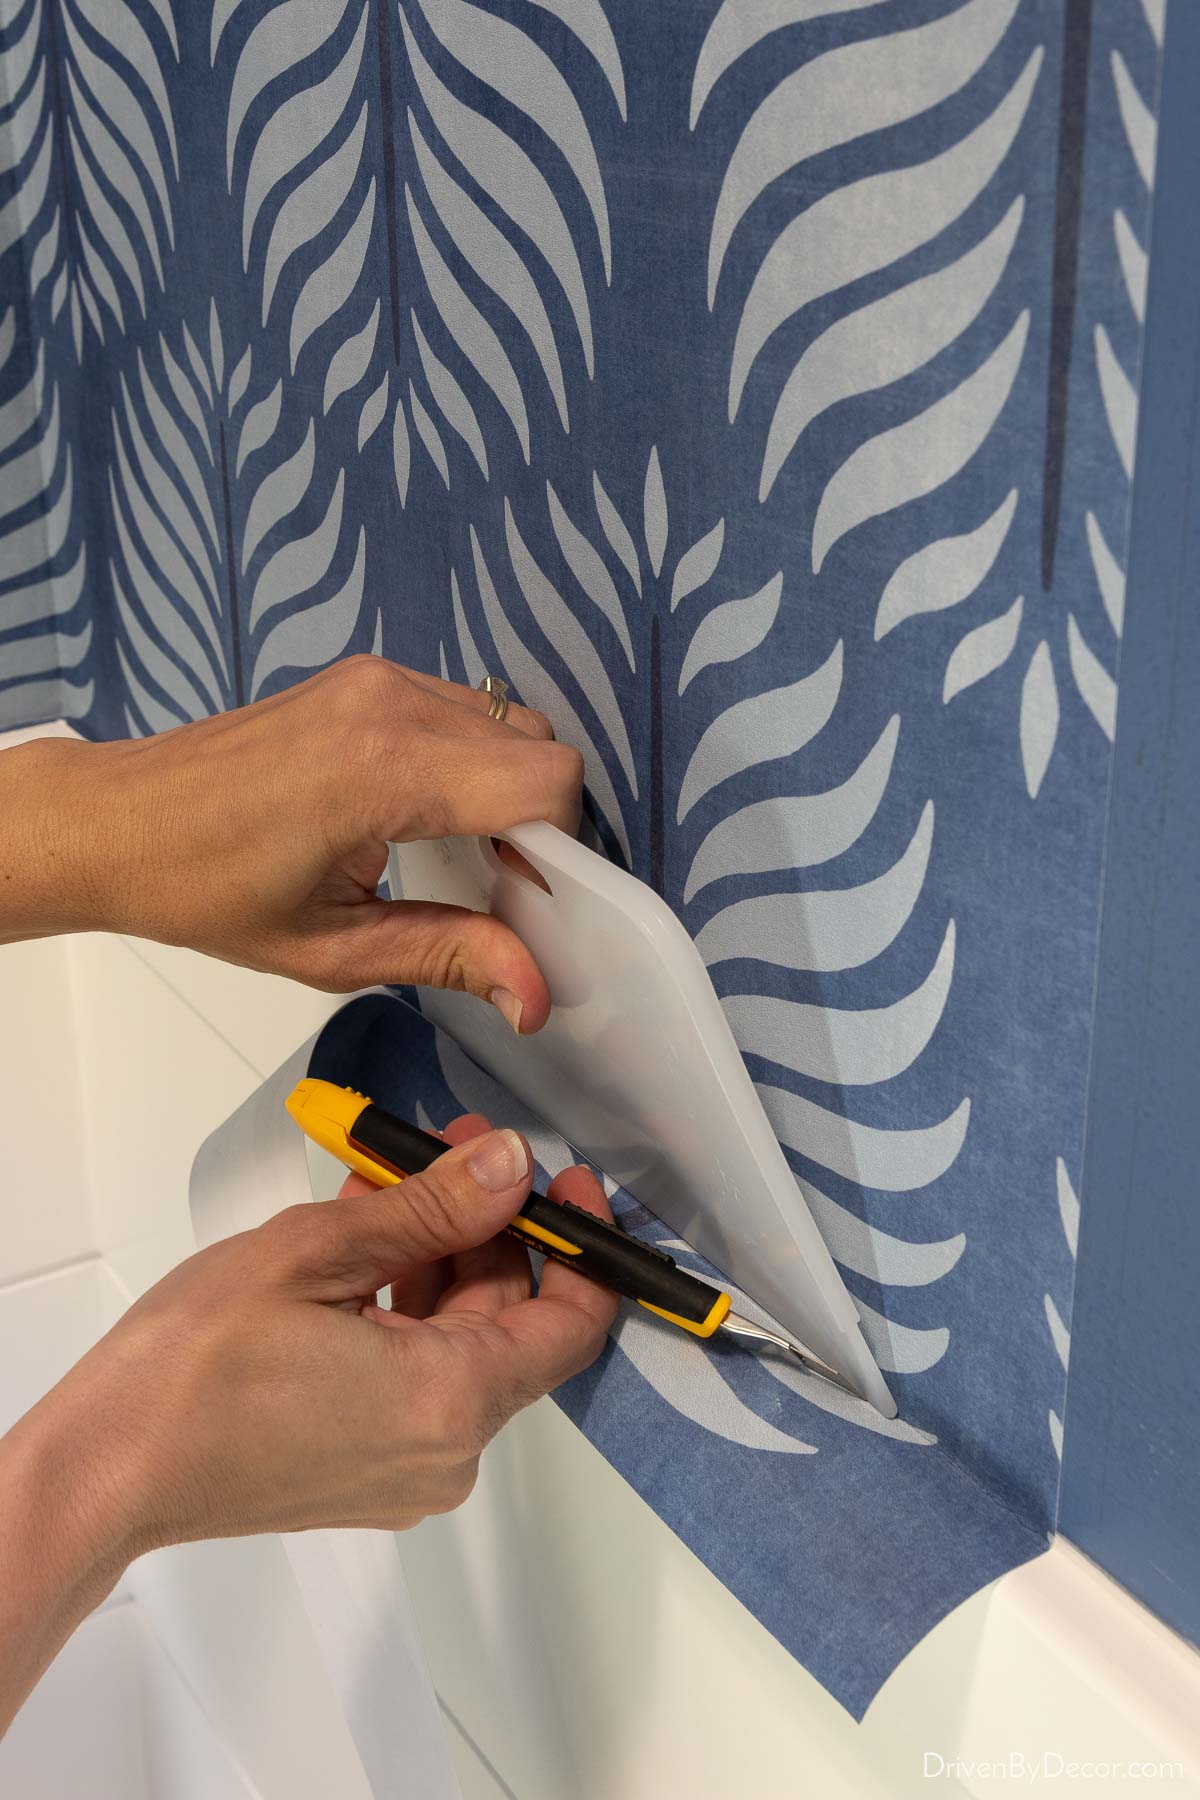 Using a straight edge and razor to cut off excess wallpaper